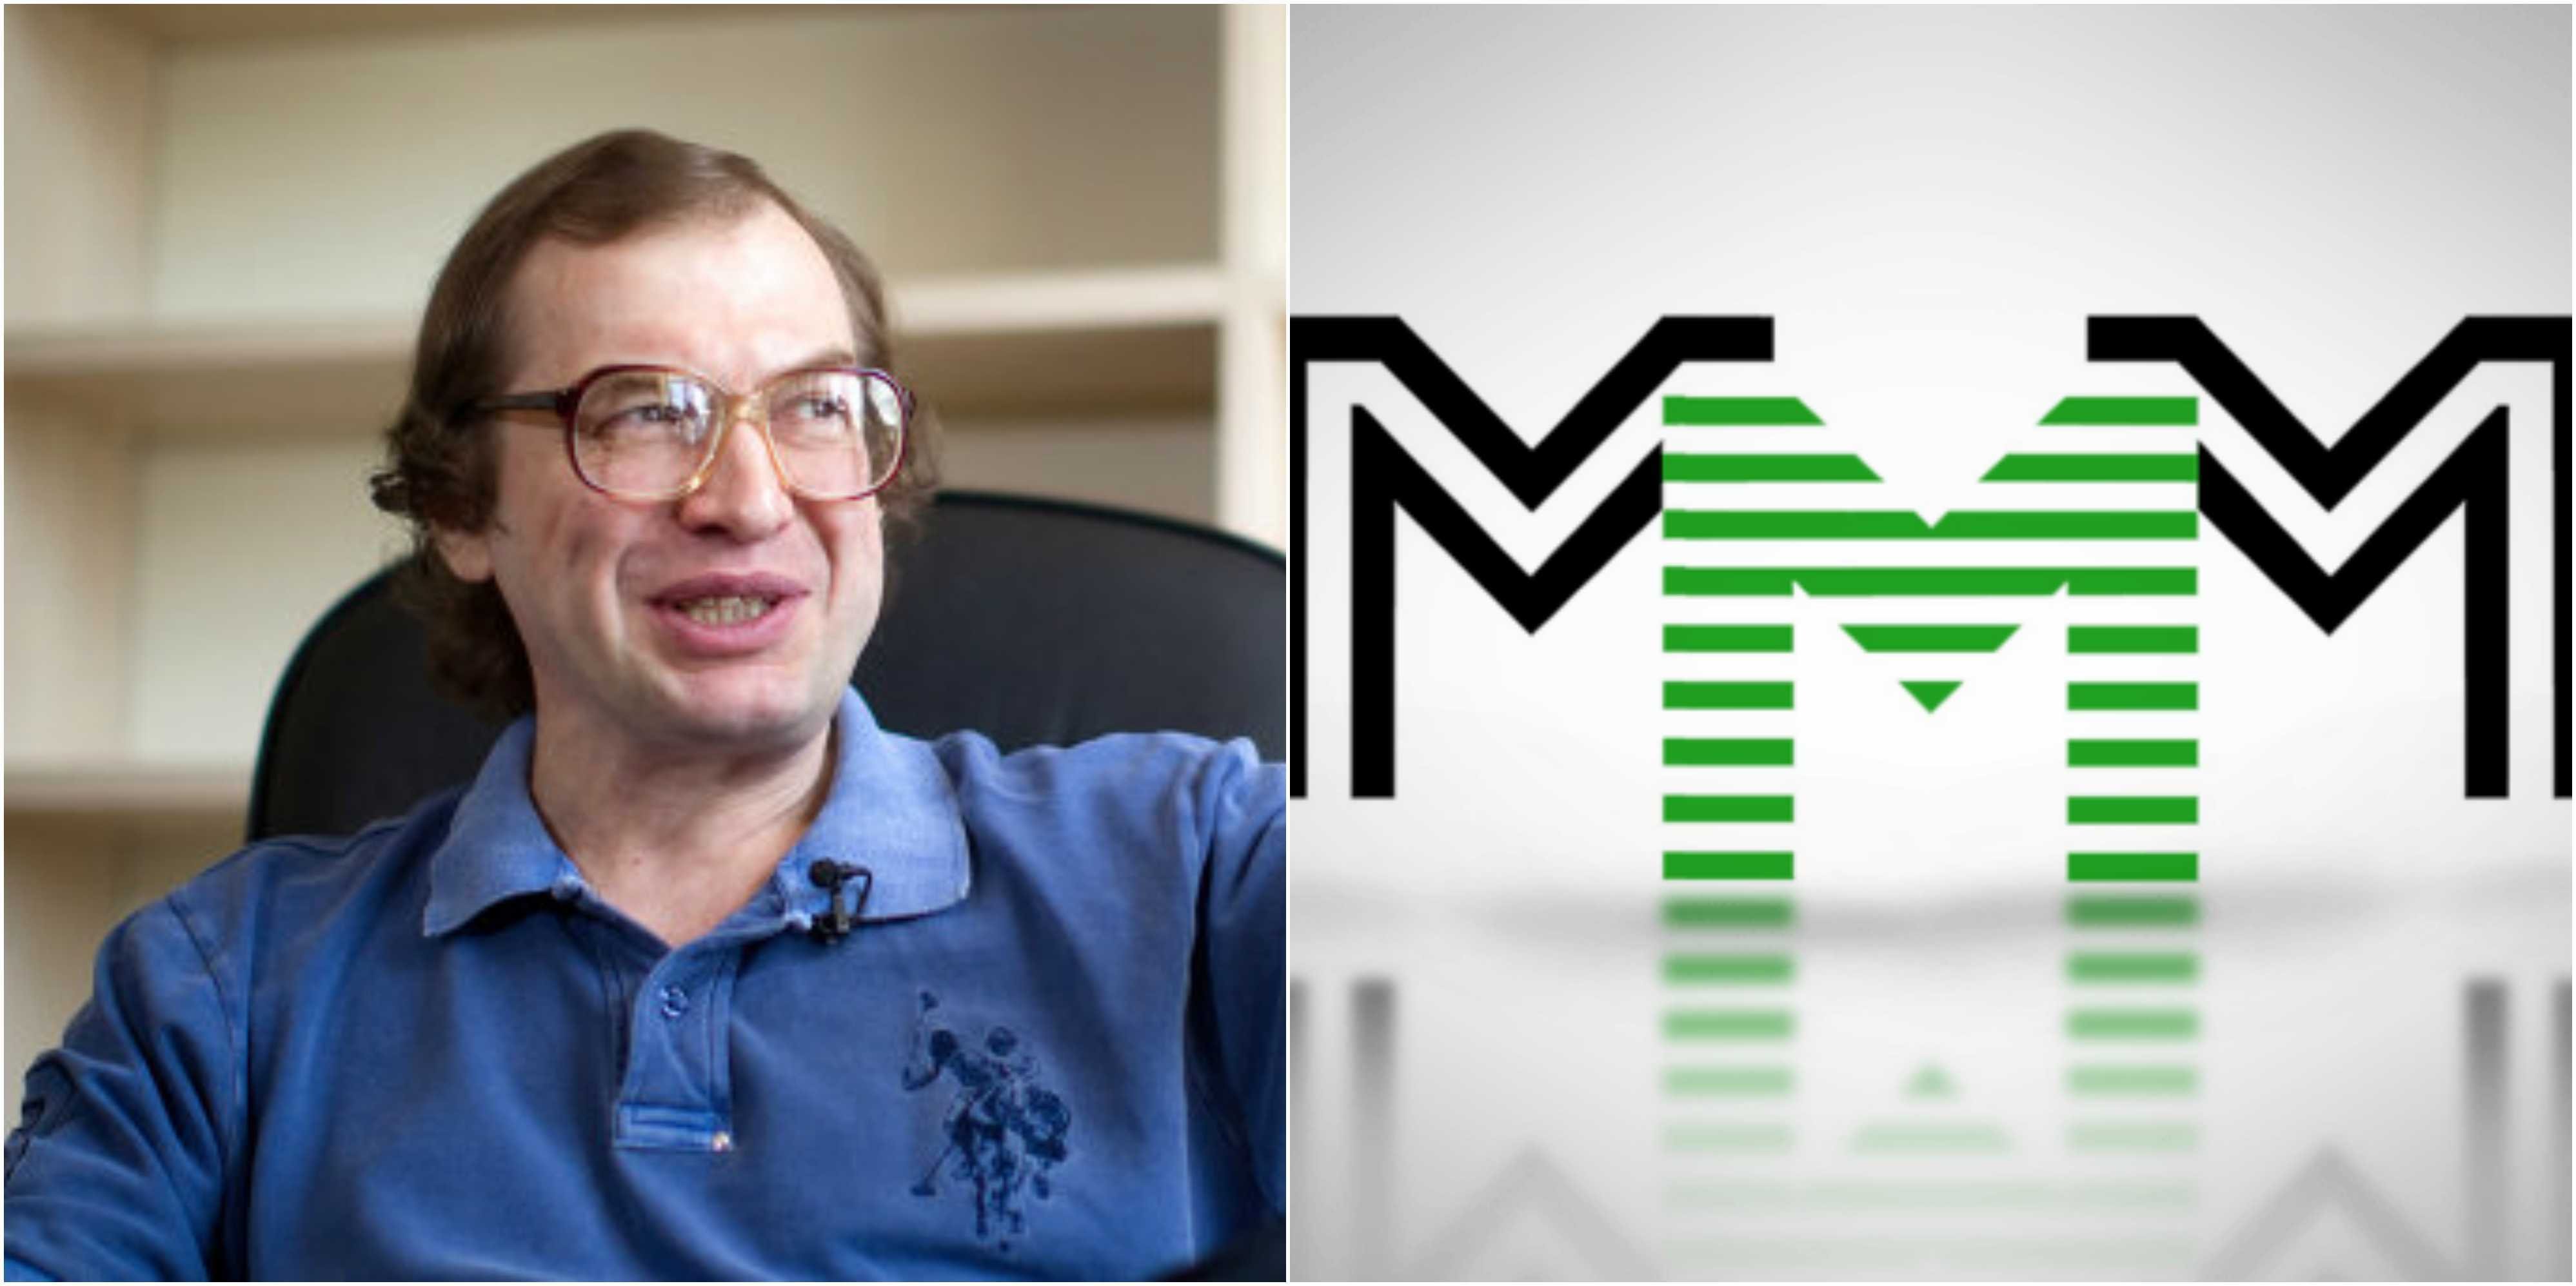 MMM founder died and left 140,000 bitcoins - Steemit.